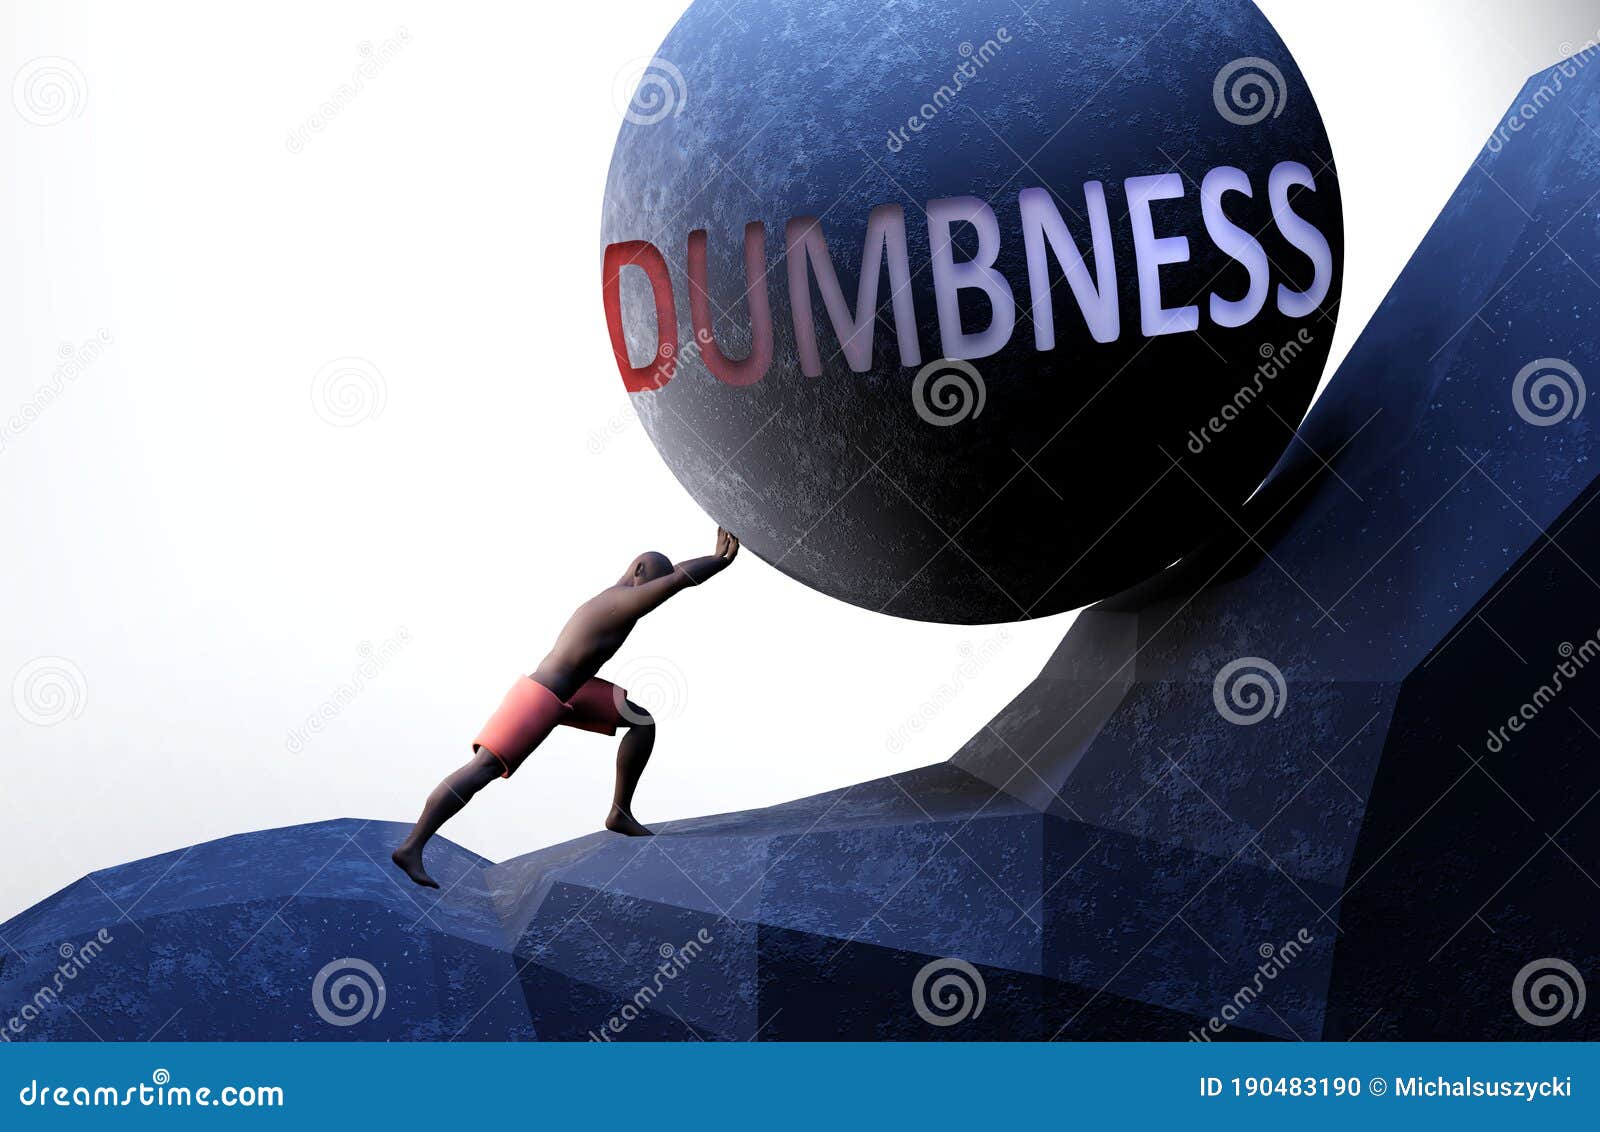 dumbness as a problem that makes life harder - ized by a person pushing weight with word dumbness to show that dumbness can